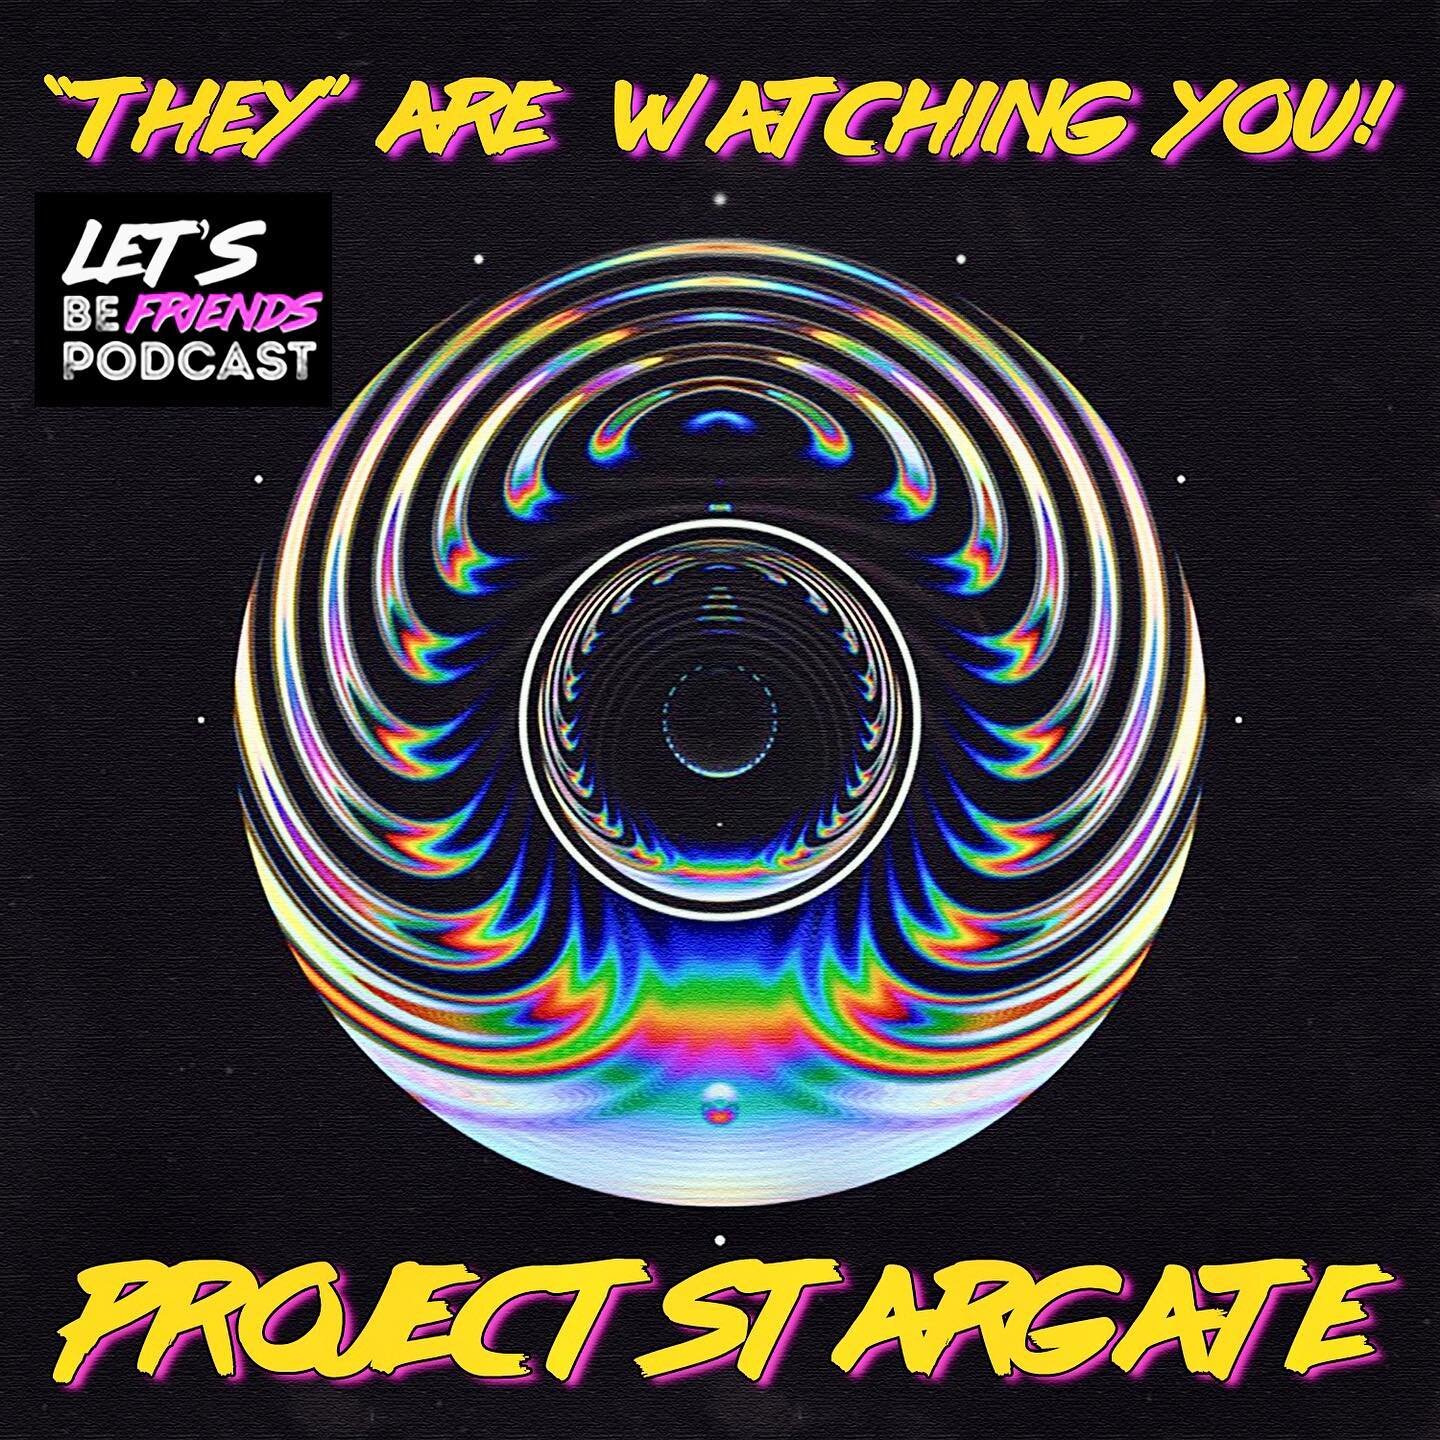 Welcome back to the Let's be friends podcast. This is a special edition two-part episode exploring and uncovering everything pointing to the real all-seeing eye watching us from the sky.

In this episode, we look into Project Stargate, a remote viewi